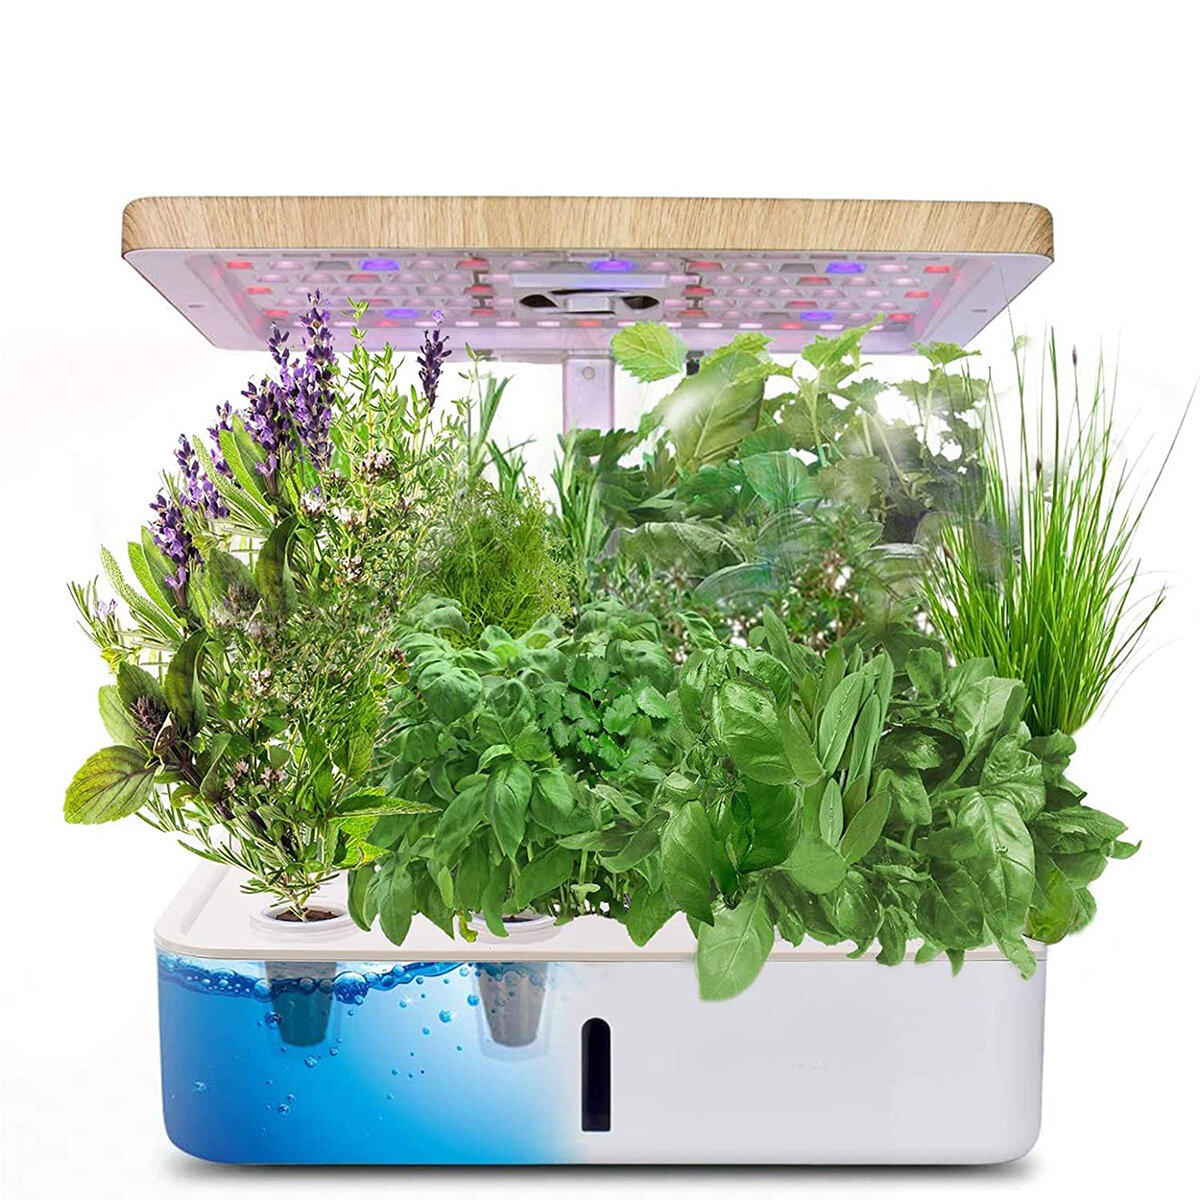 Hydroponics growing system indoor herb garden planter starter kit with ...